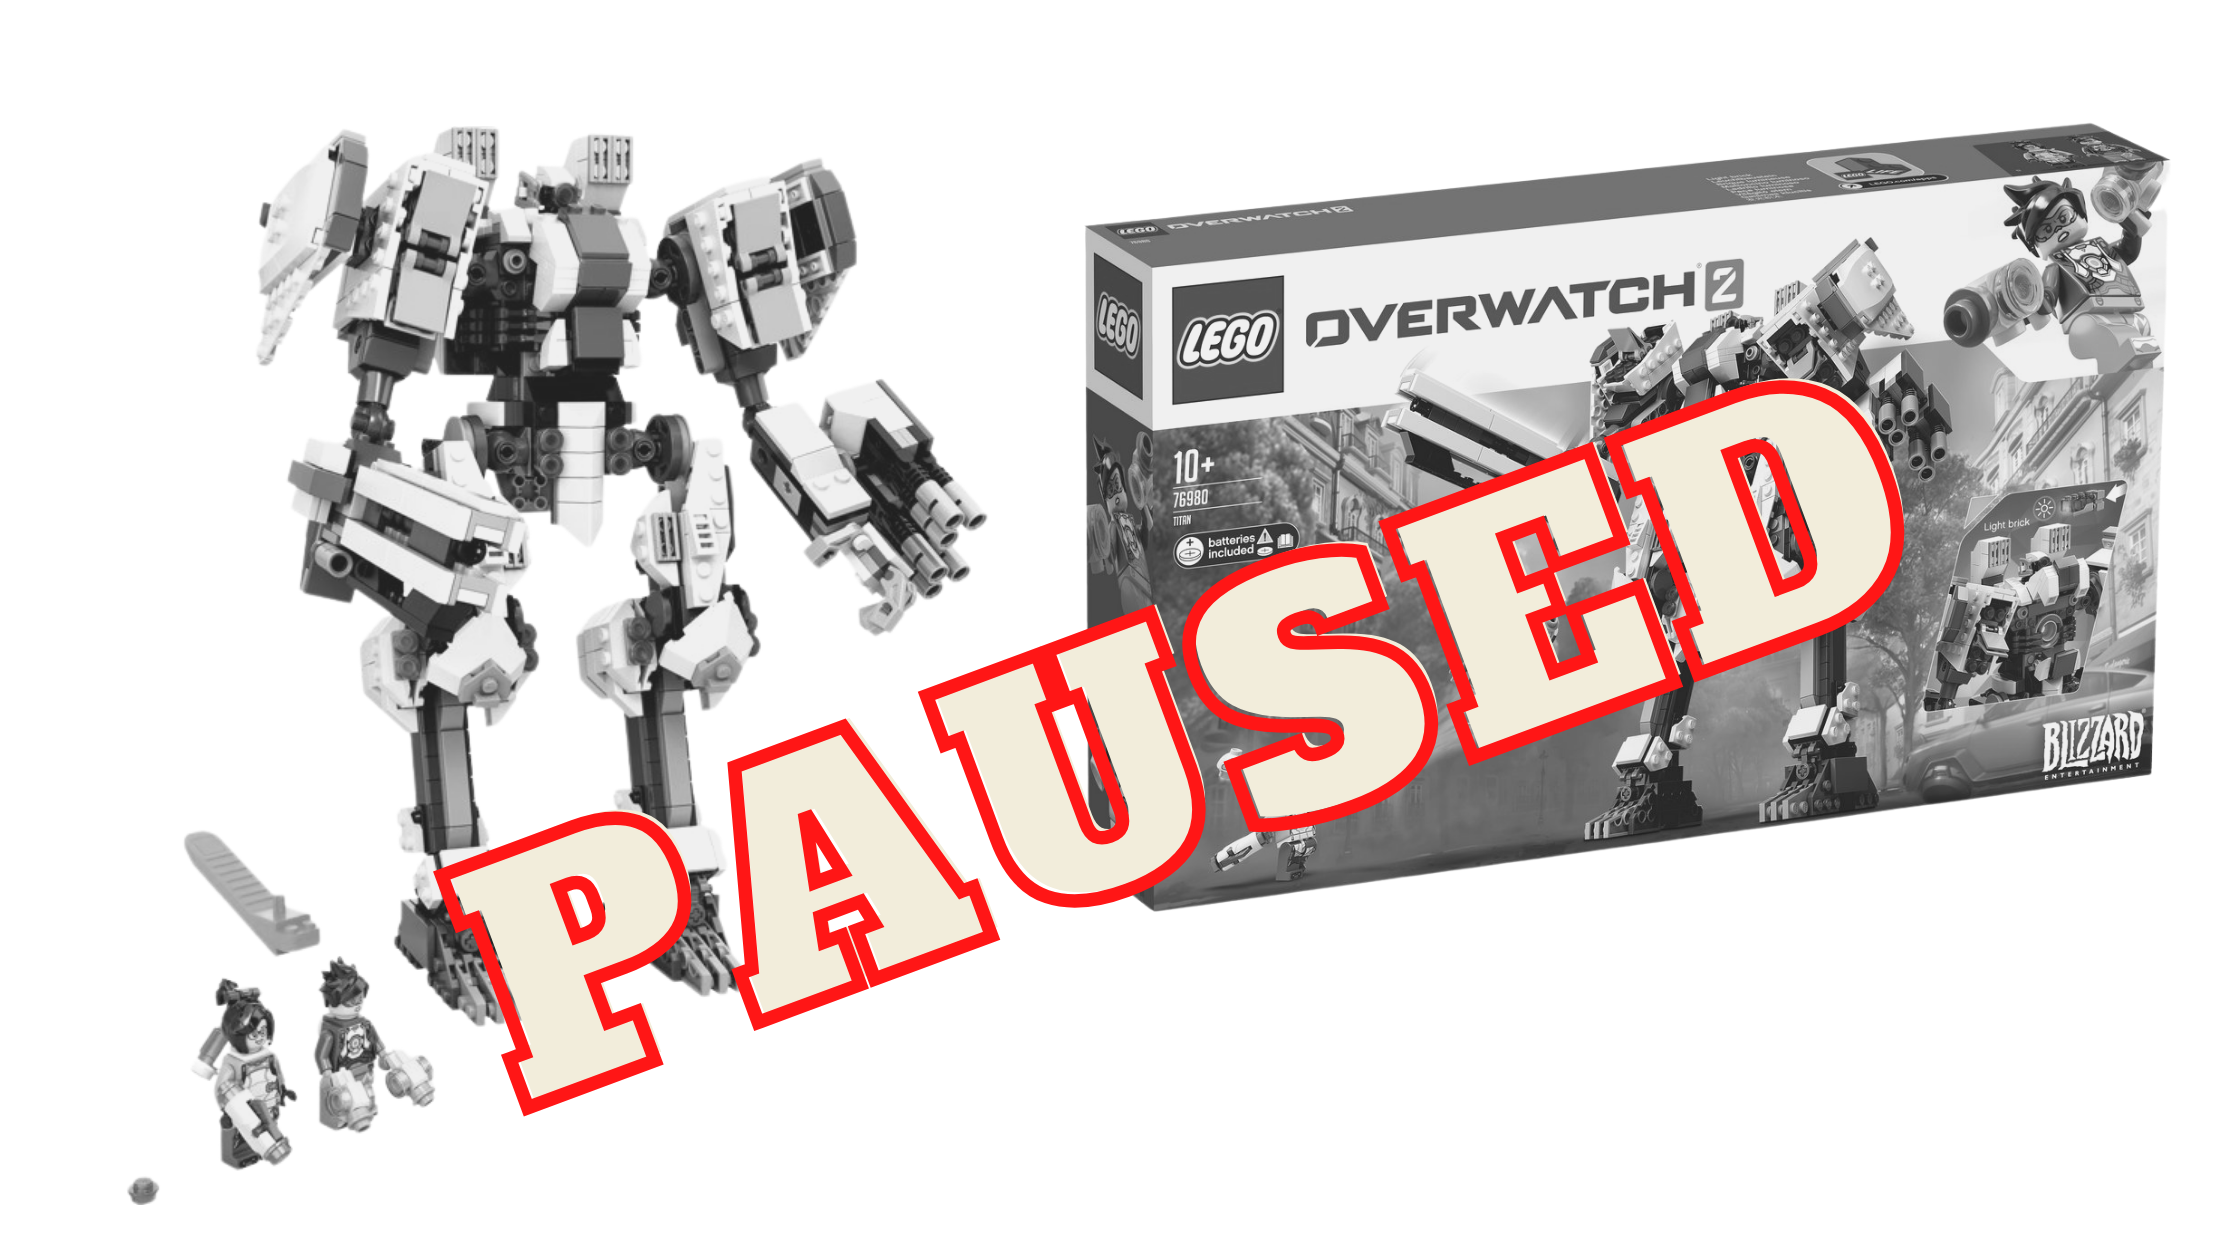 Overwatch 2022 Calendar Lego Overwatch 2 Titan Launch Paused As The Lego Group Reviews Partnership  With Activision Blizzard - Jay's Brick Blog